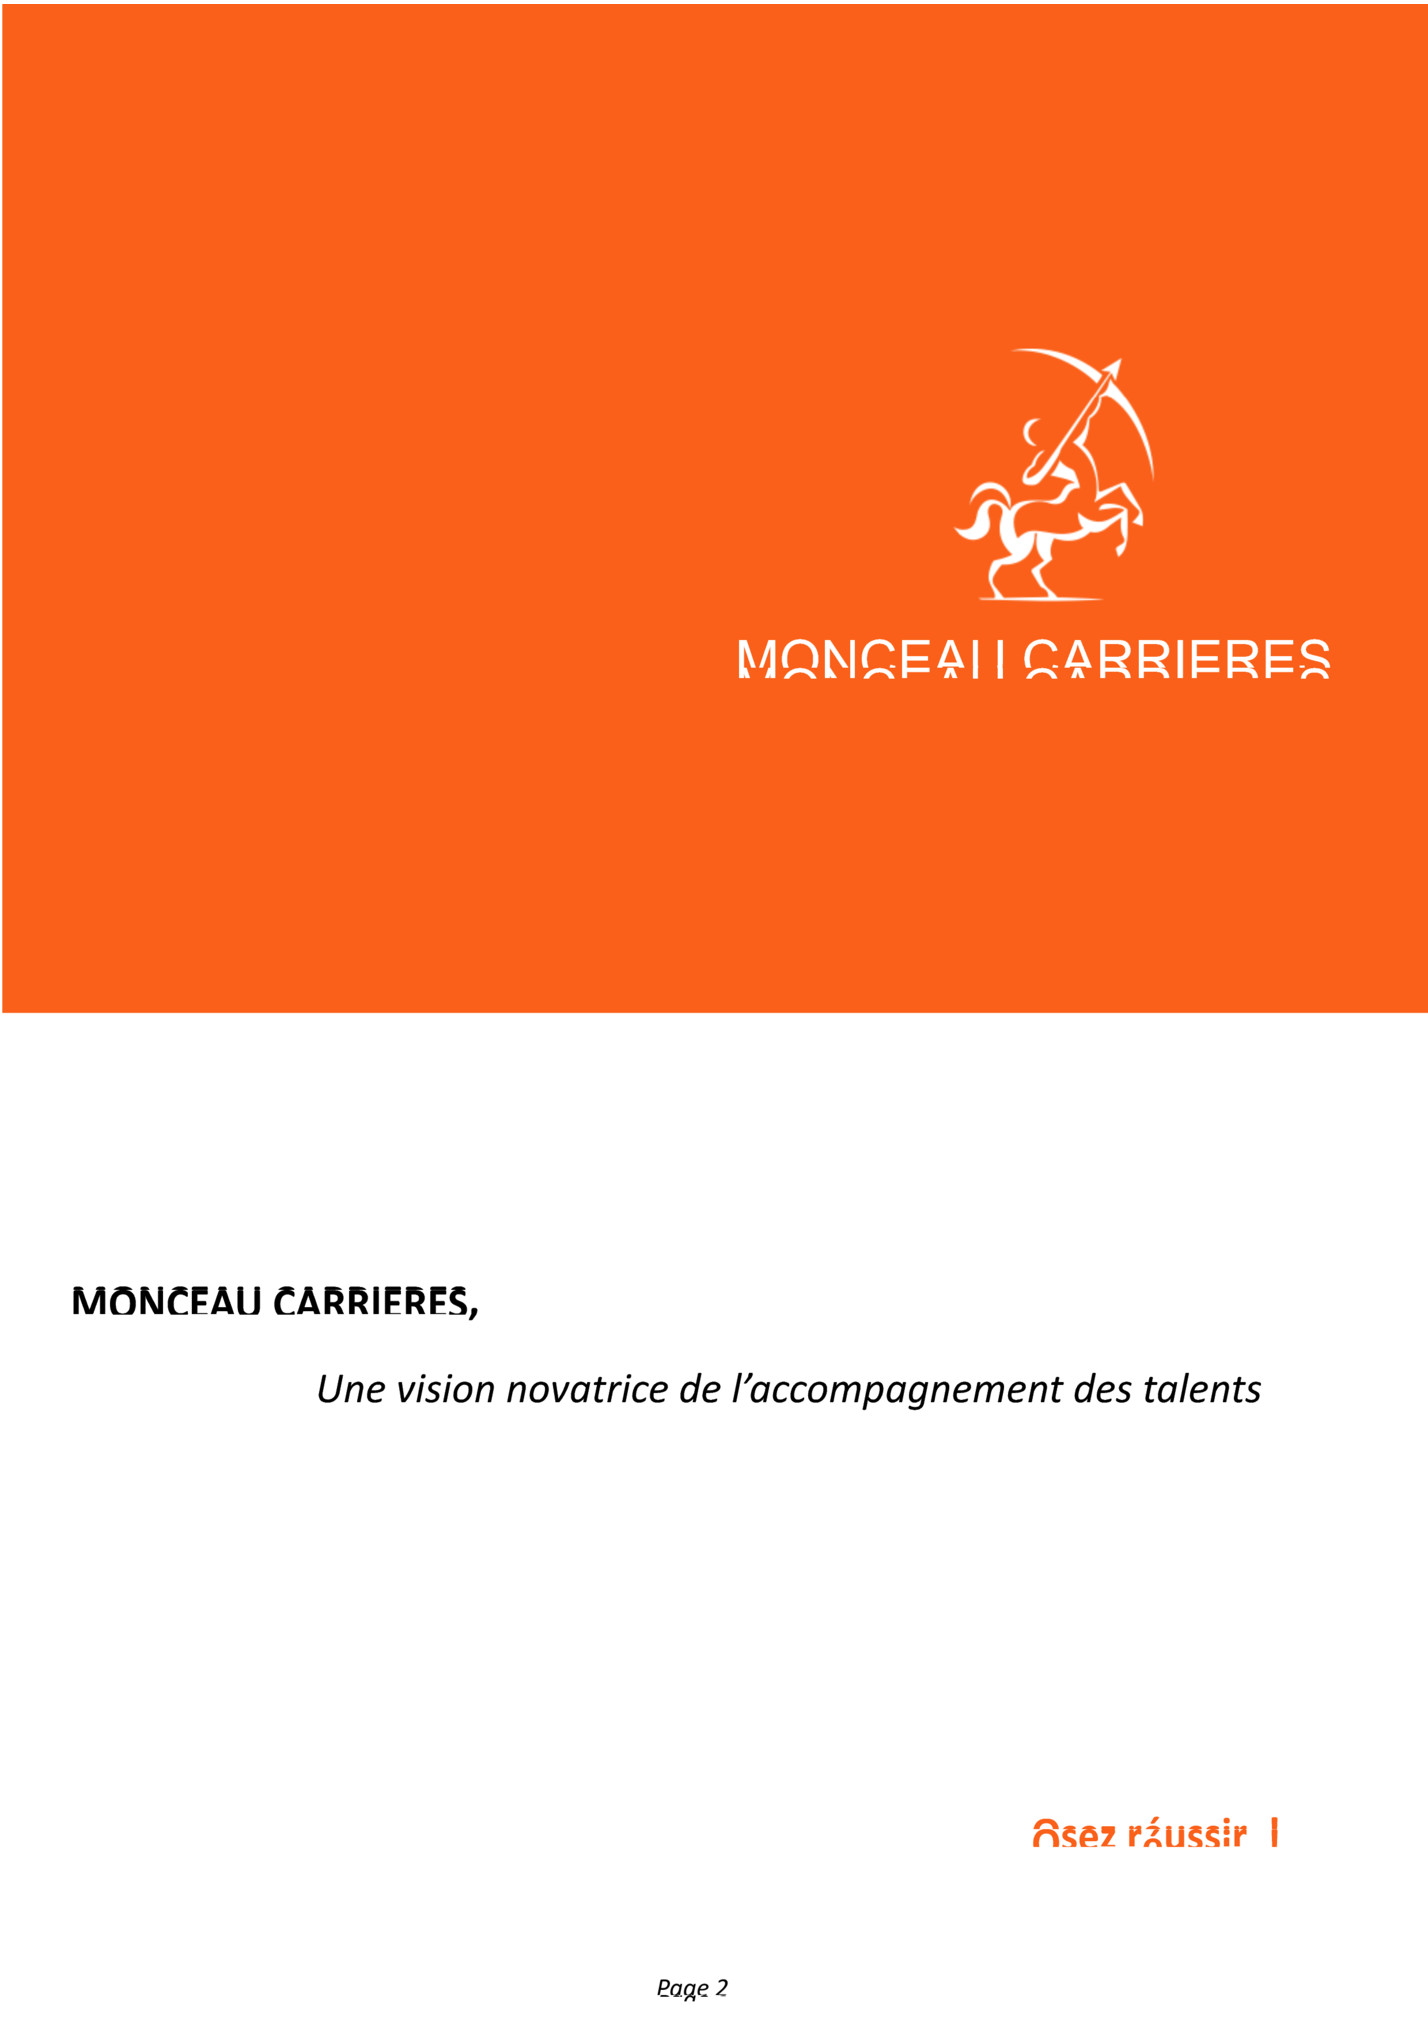 MONCEAU CARRIERES